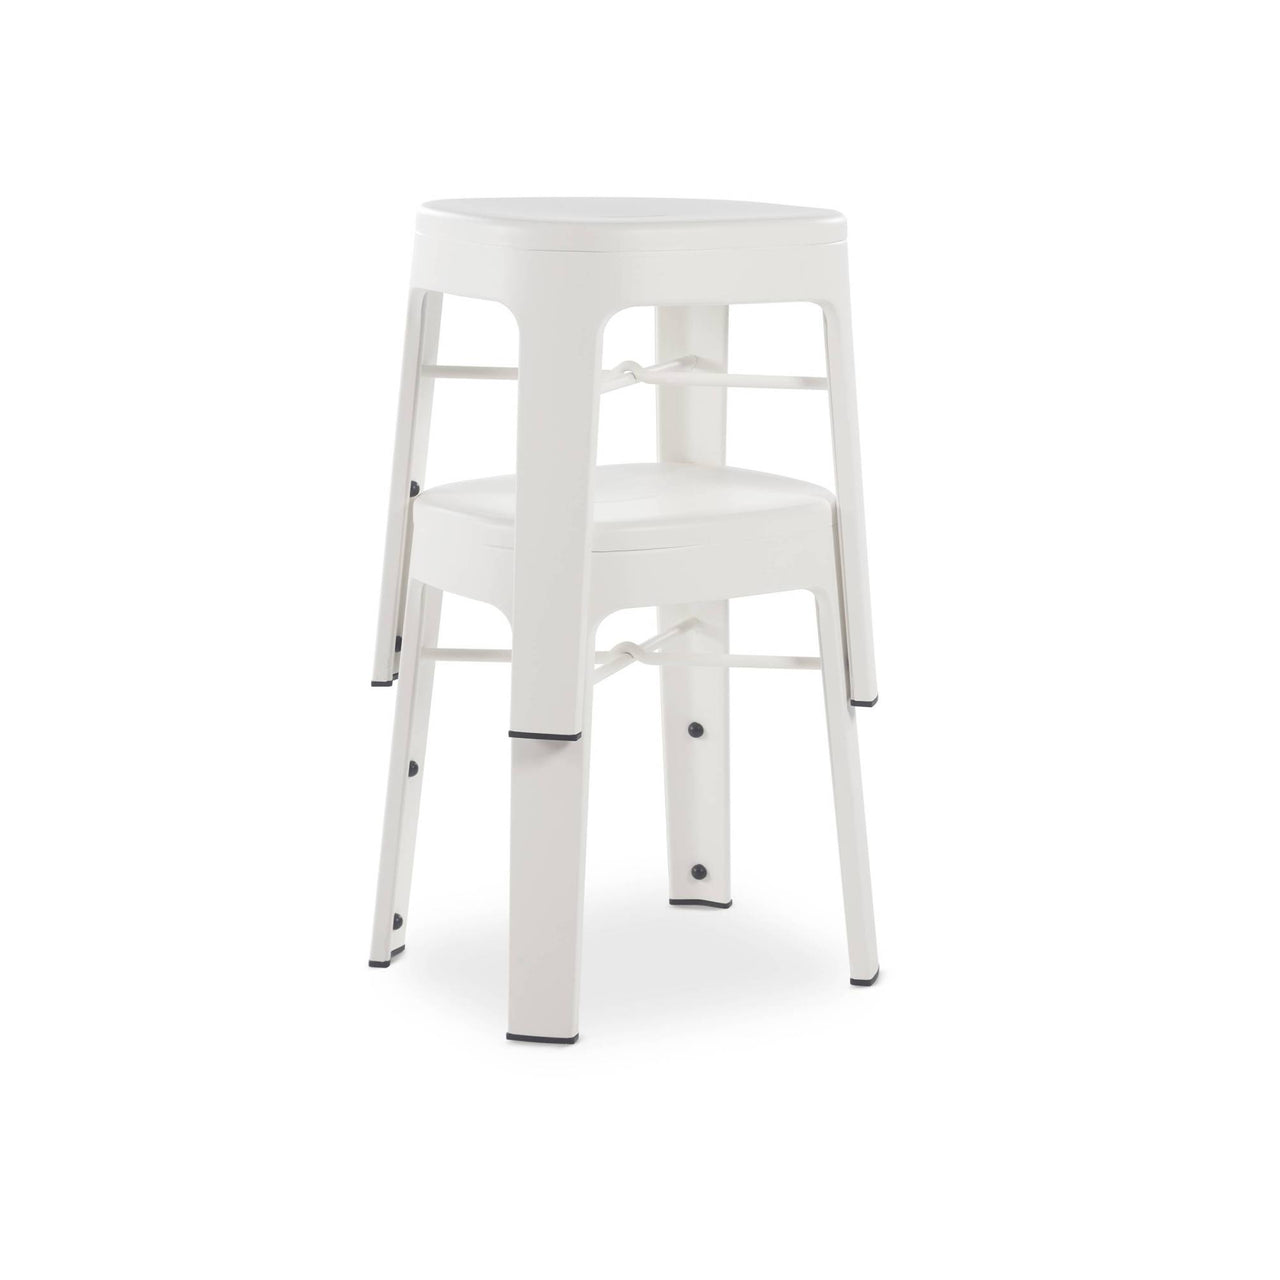 Ombra Stool: Stacking